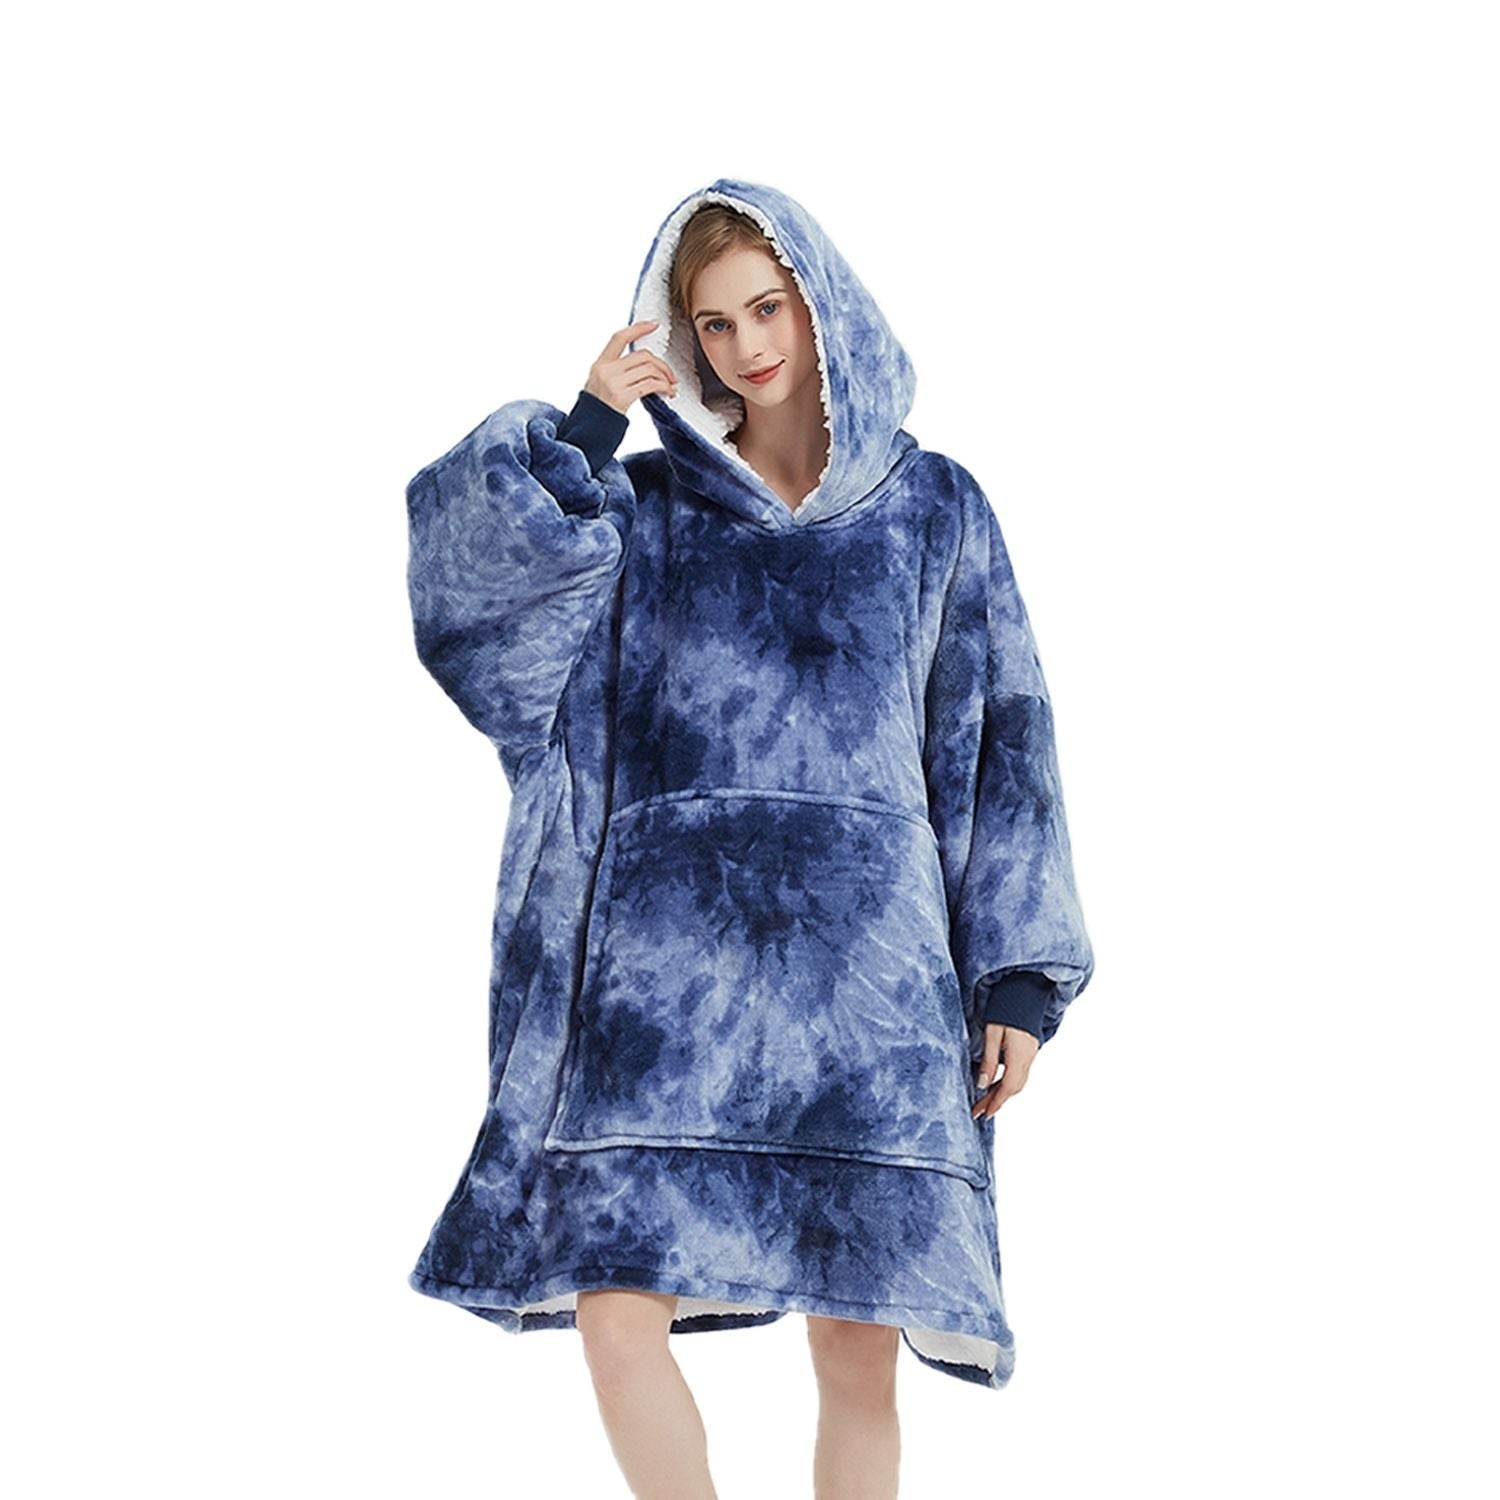 GOMINIMO Hoodie Blanket Adult Tie-Dyed Blue GO-HB-127-AYS from Deals499 at Deals499